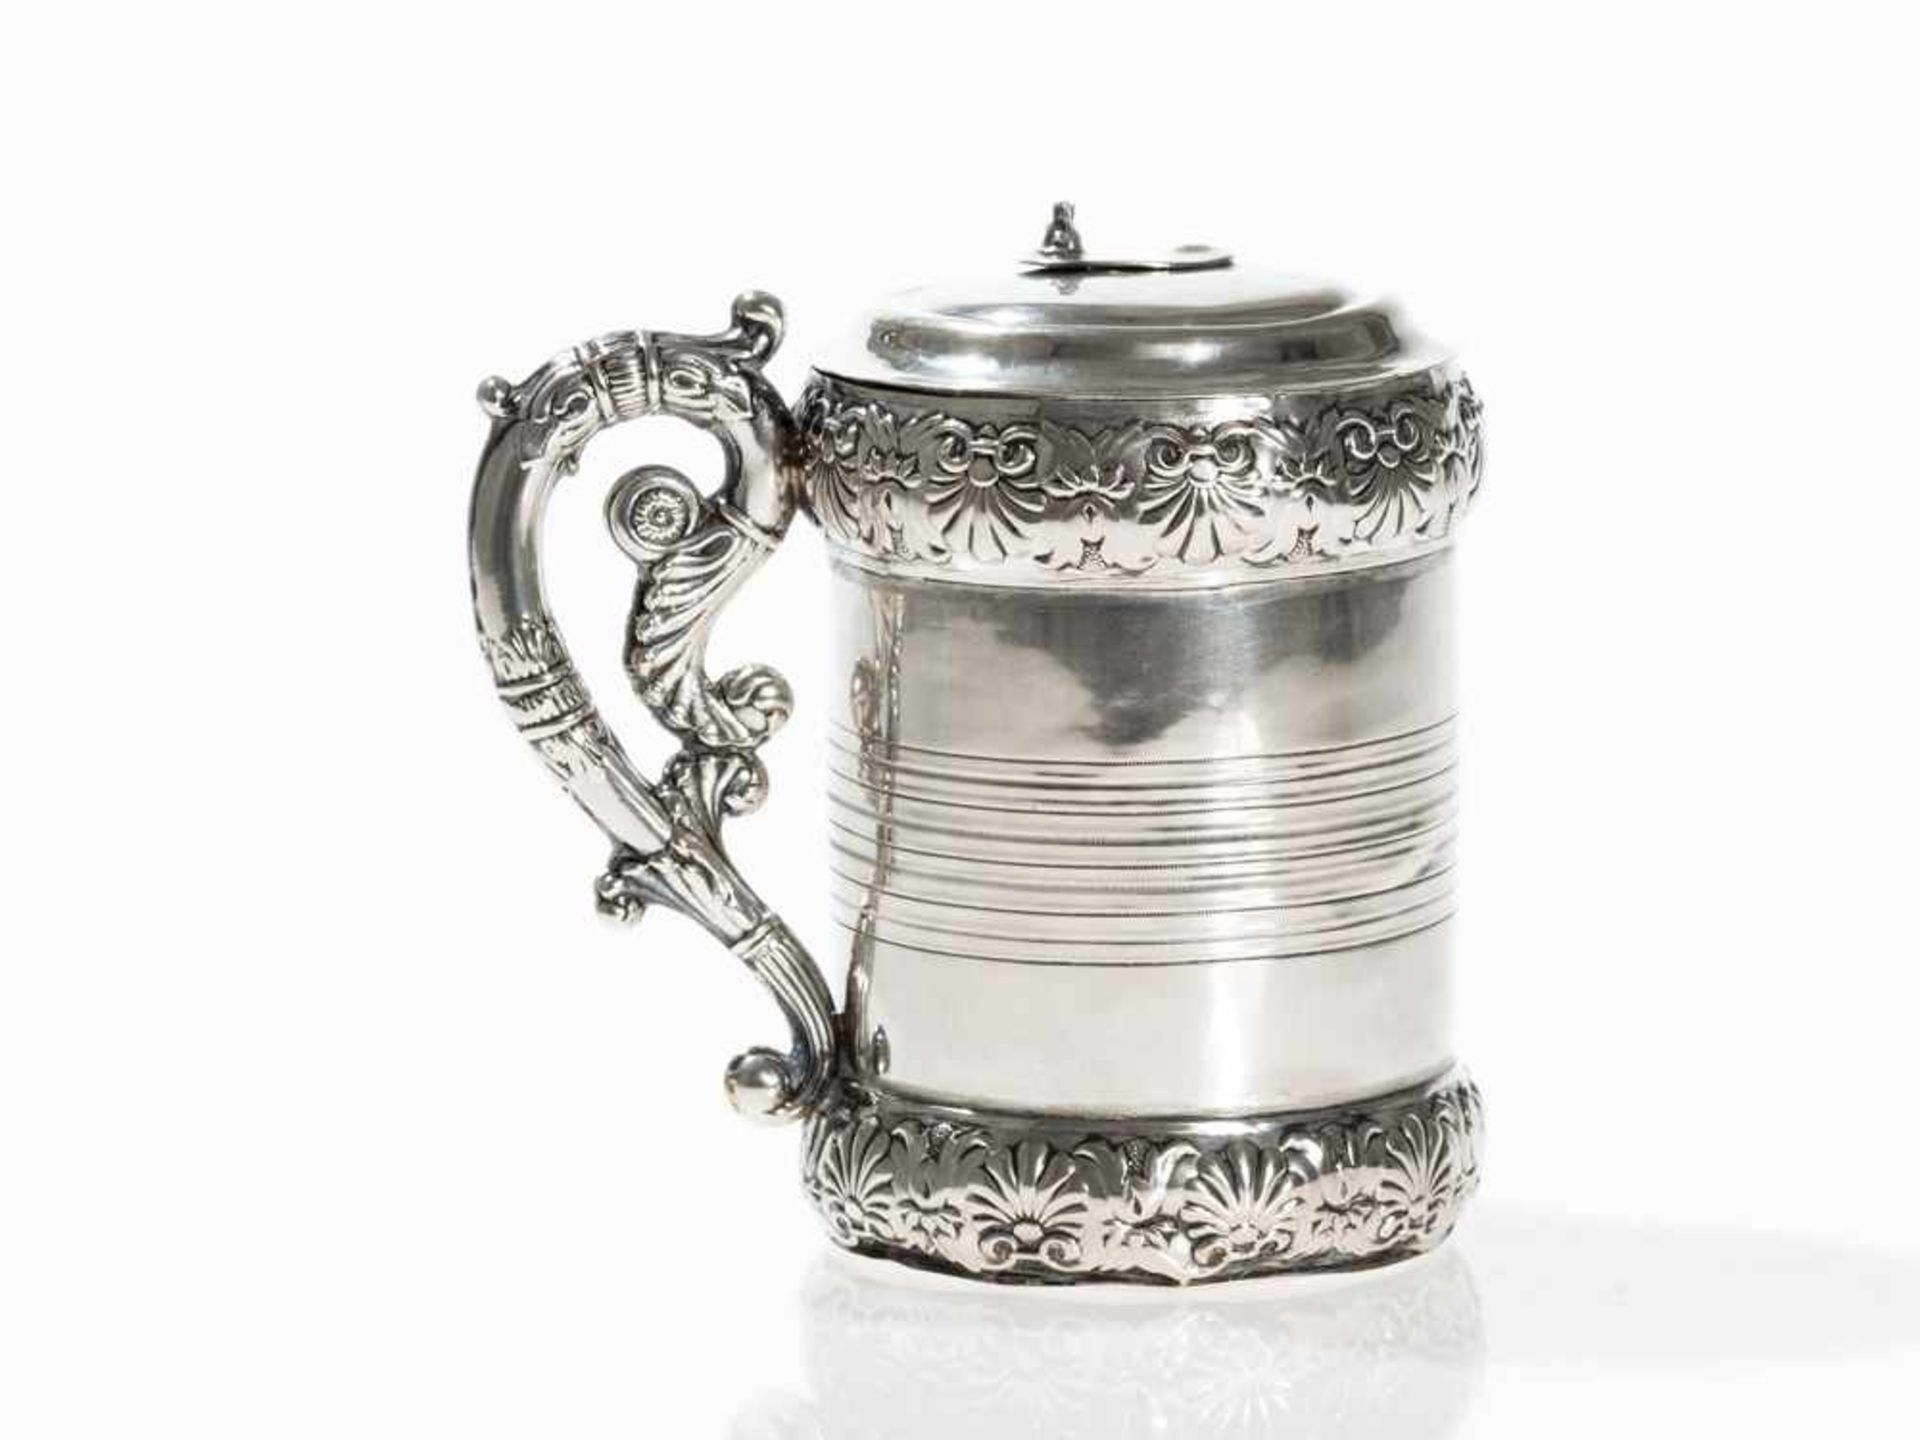 Lidded Silver Cup, Biedermeier, Berlin, around 1825/30 Silver, wrought and chased Berlin/Germany,